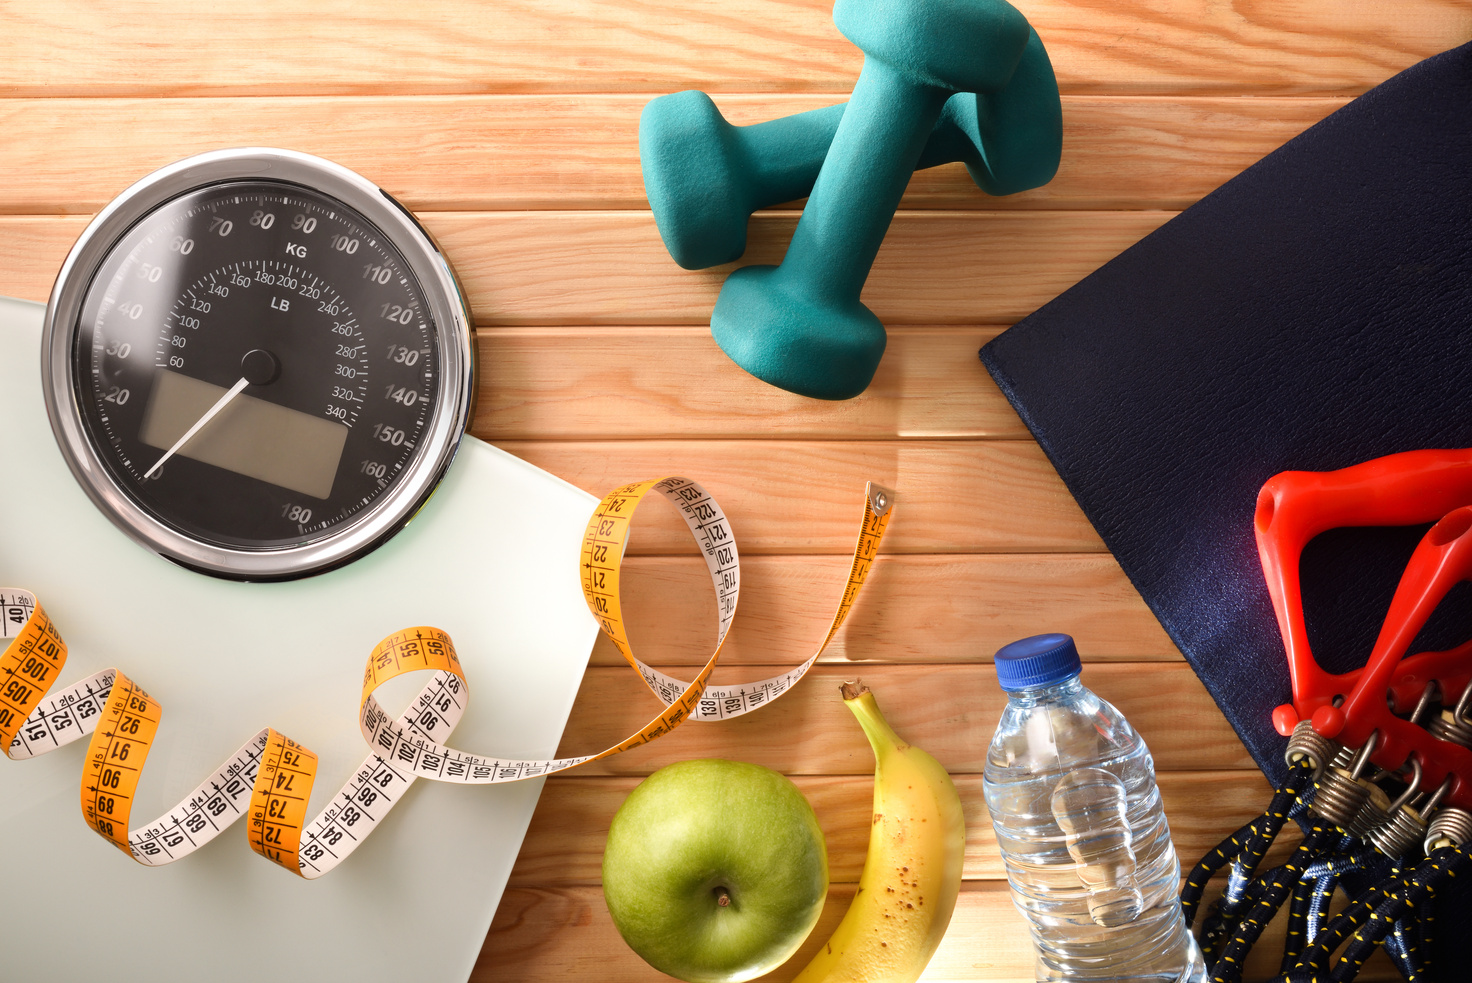 Wellness and health with sports accessories and weight control equipment